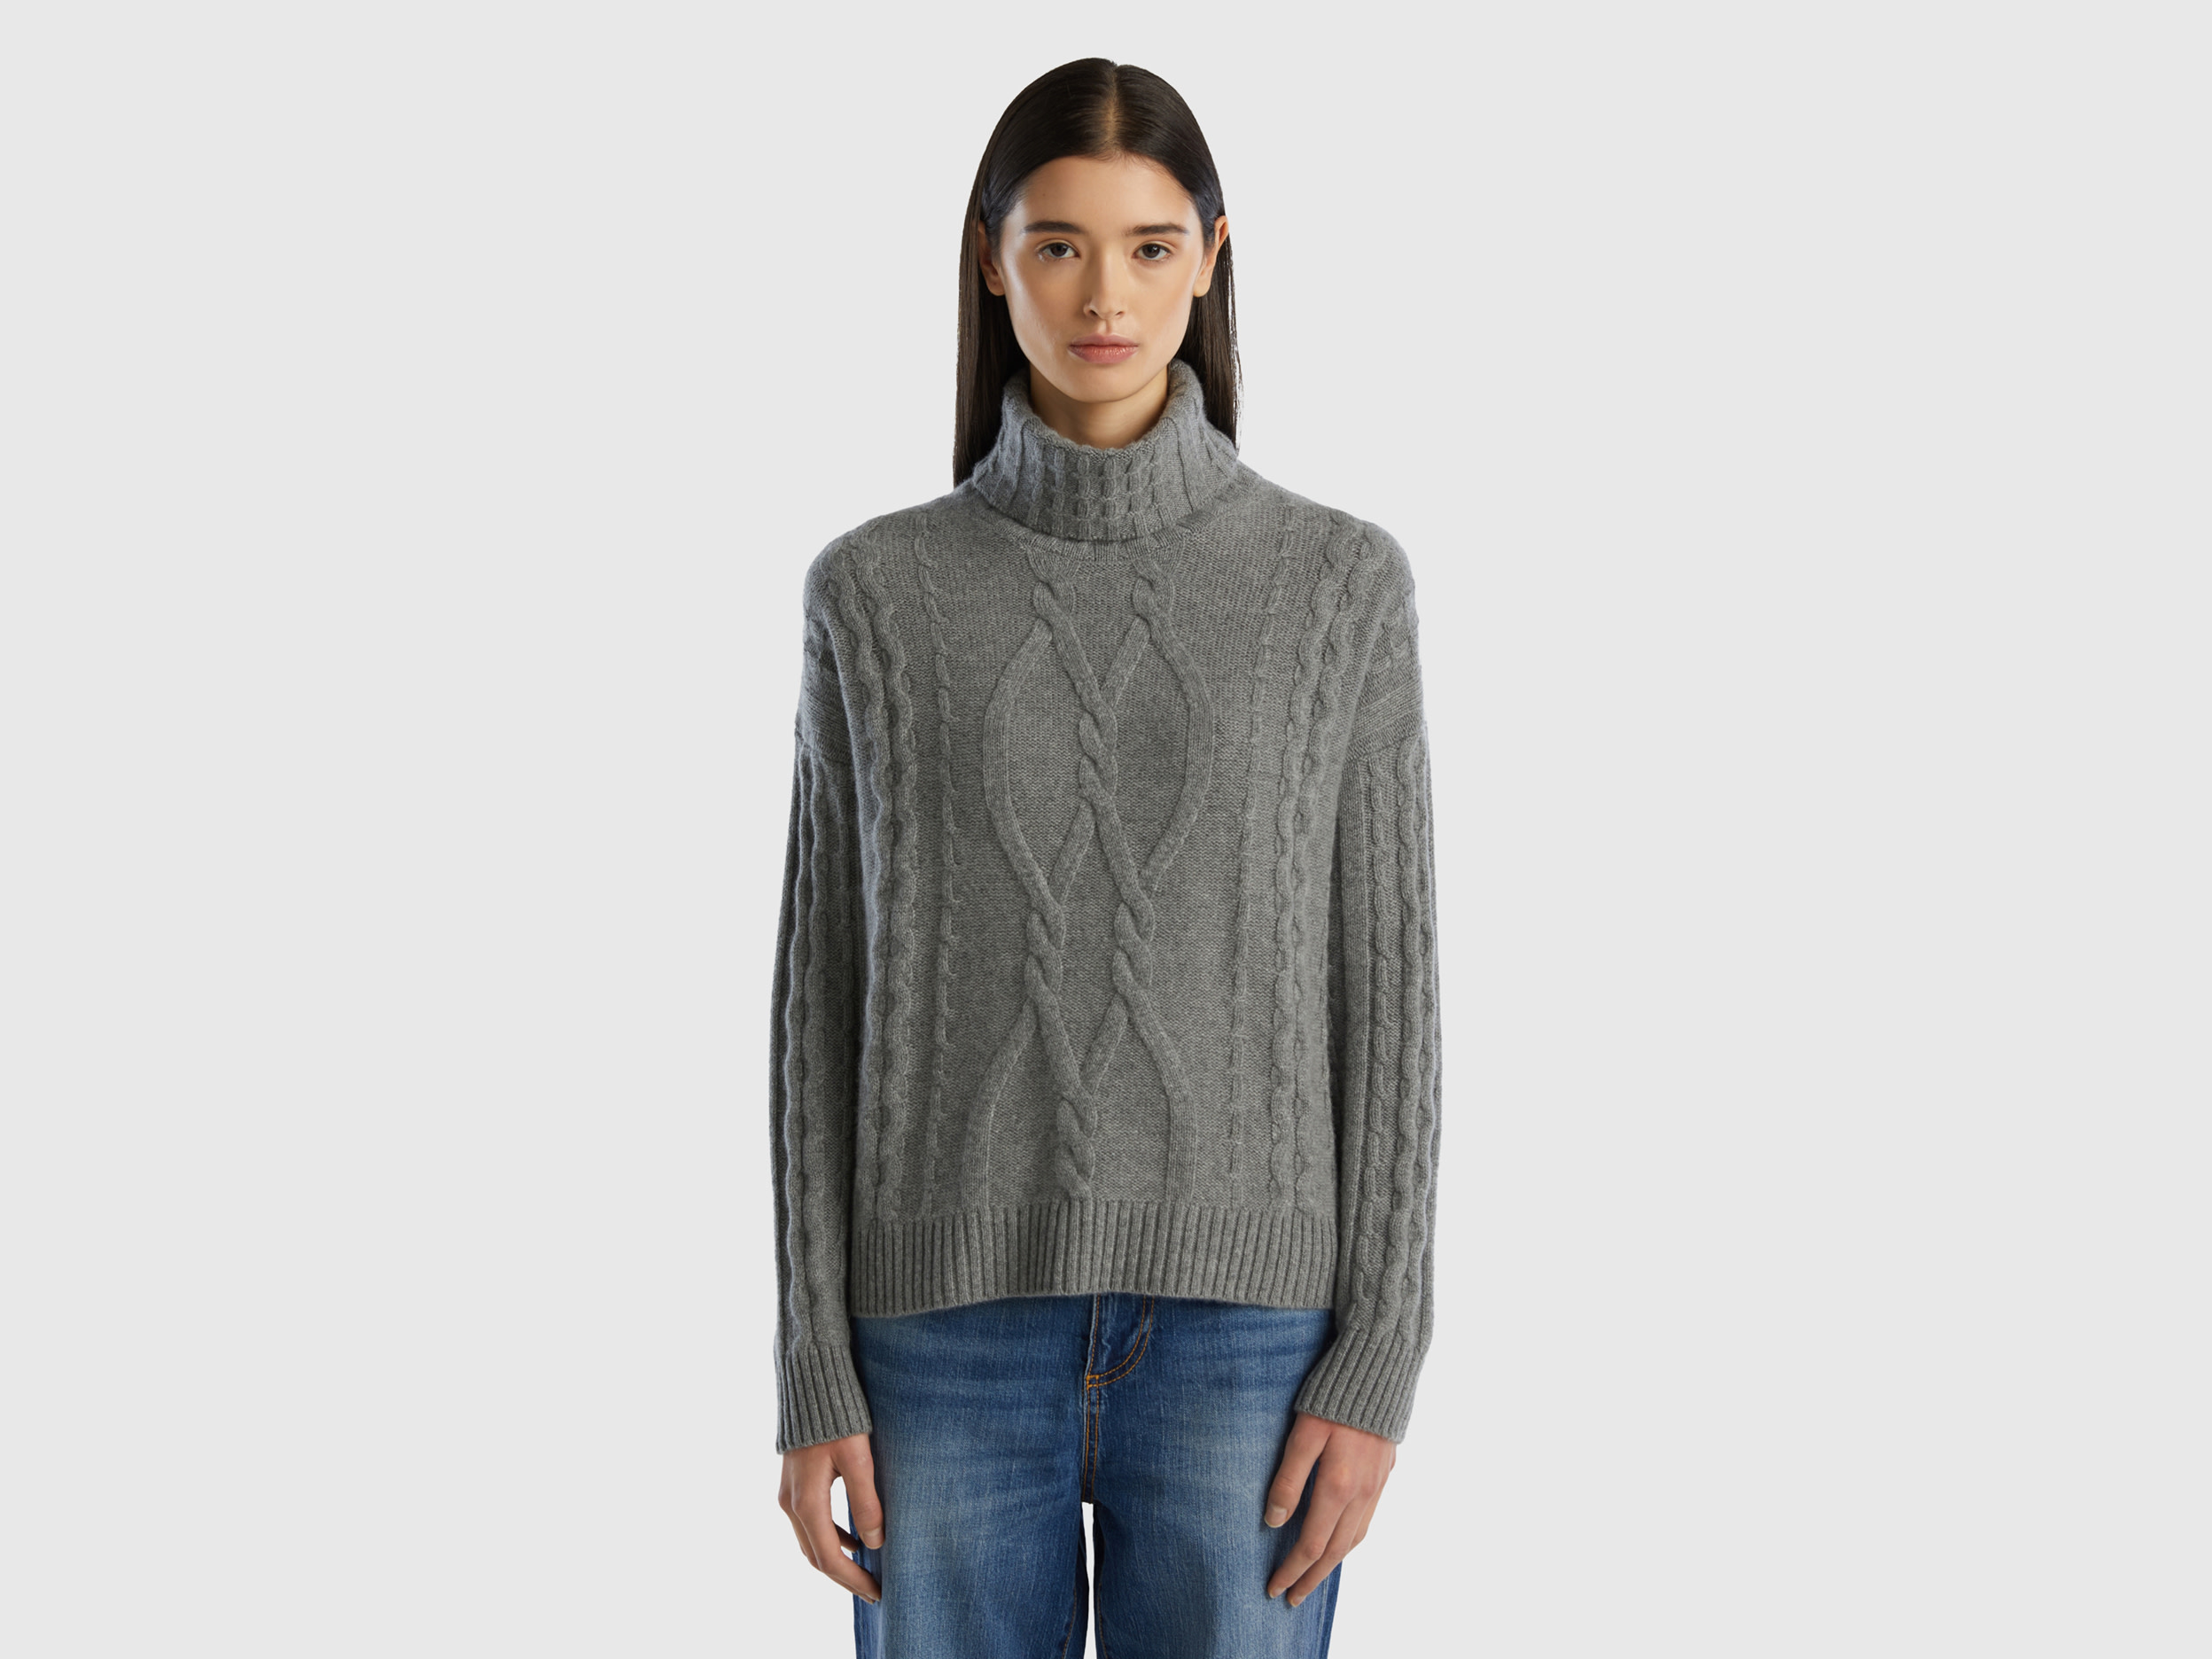 Benetton, Pure Cashmere Turtleneck With Cable Knit, size S, Dark Gray, Women